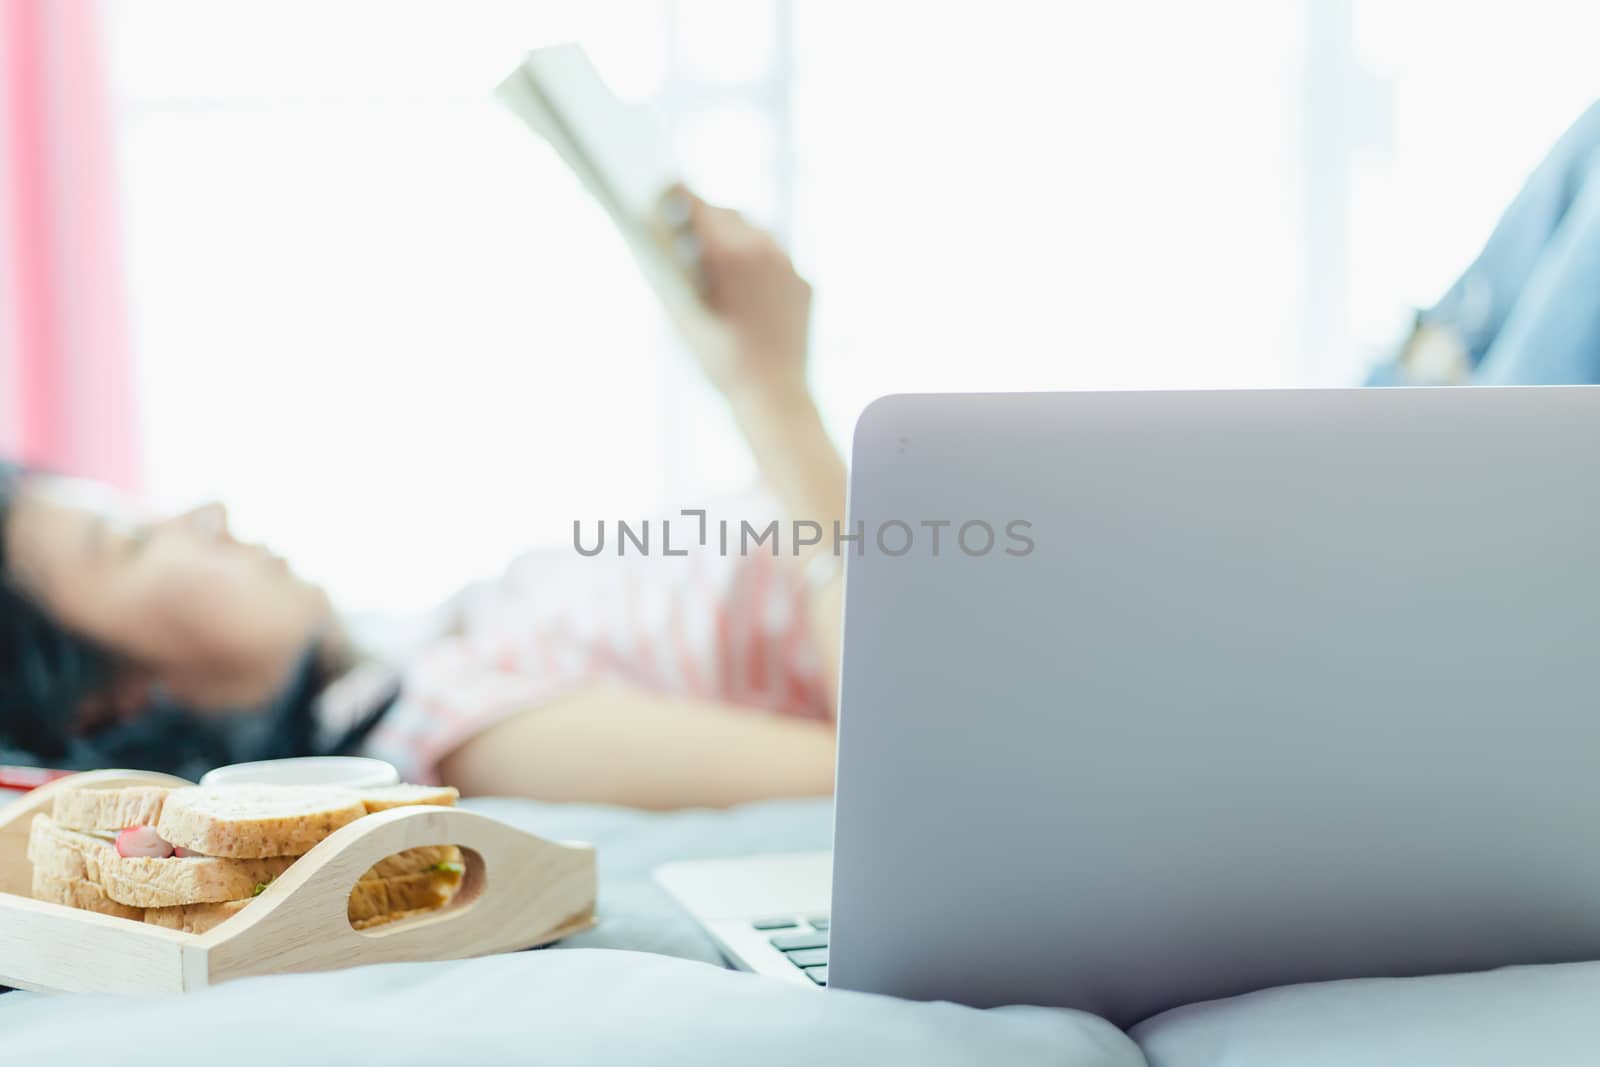 Blurred woman reading a book with computer and breakfast in bed for self-quarantine, social distancing, staying and working at home in coronavirus or Covid-2019 outbreak situation concept